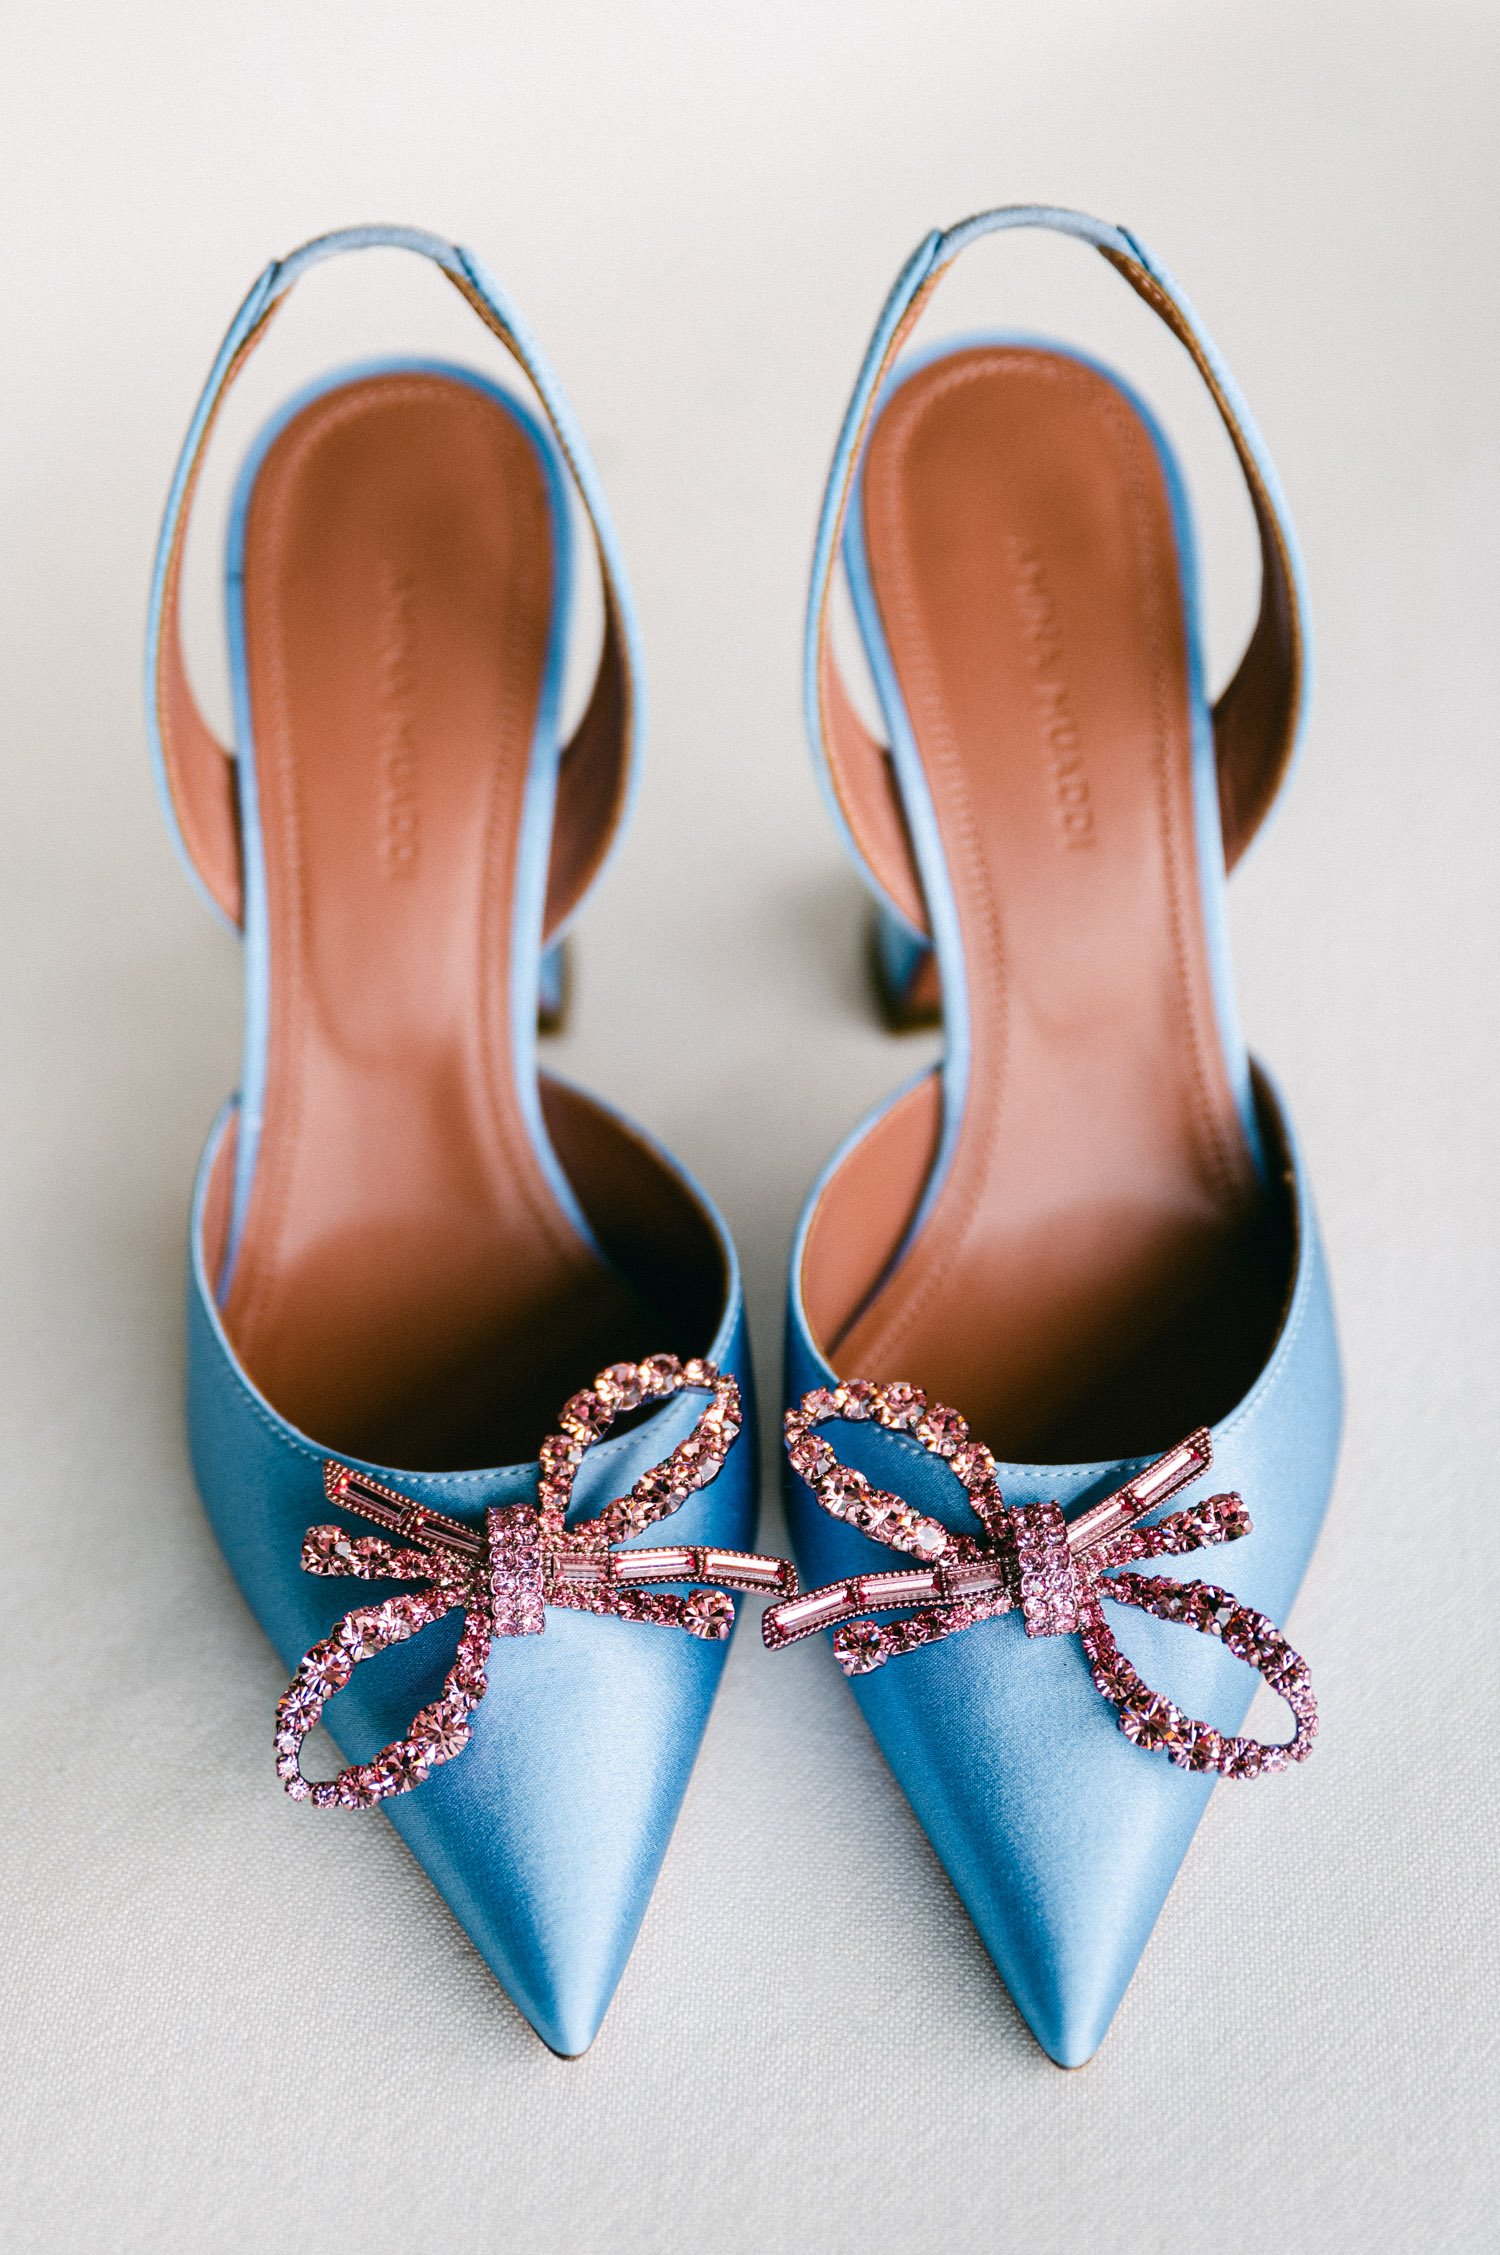 Edgewood Tahoe wedding photos, photo of blue wedding shoes with a crystal bow